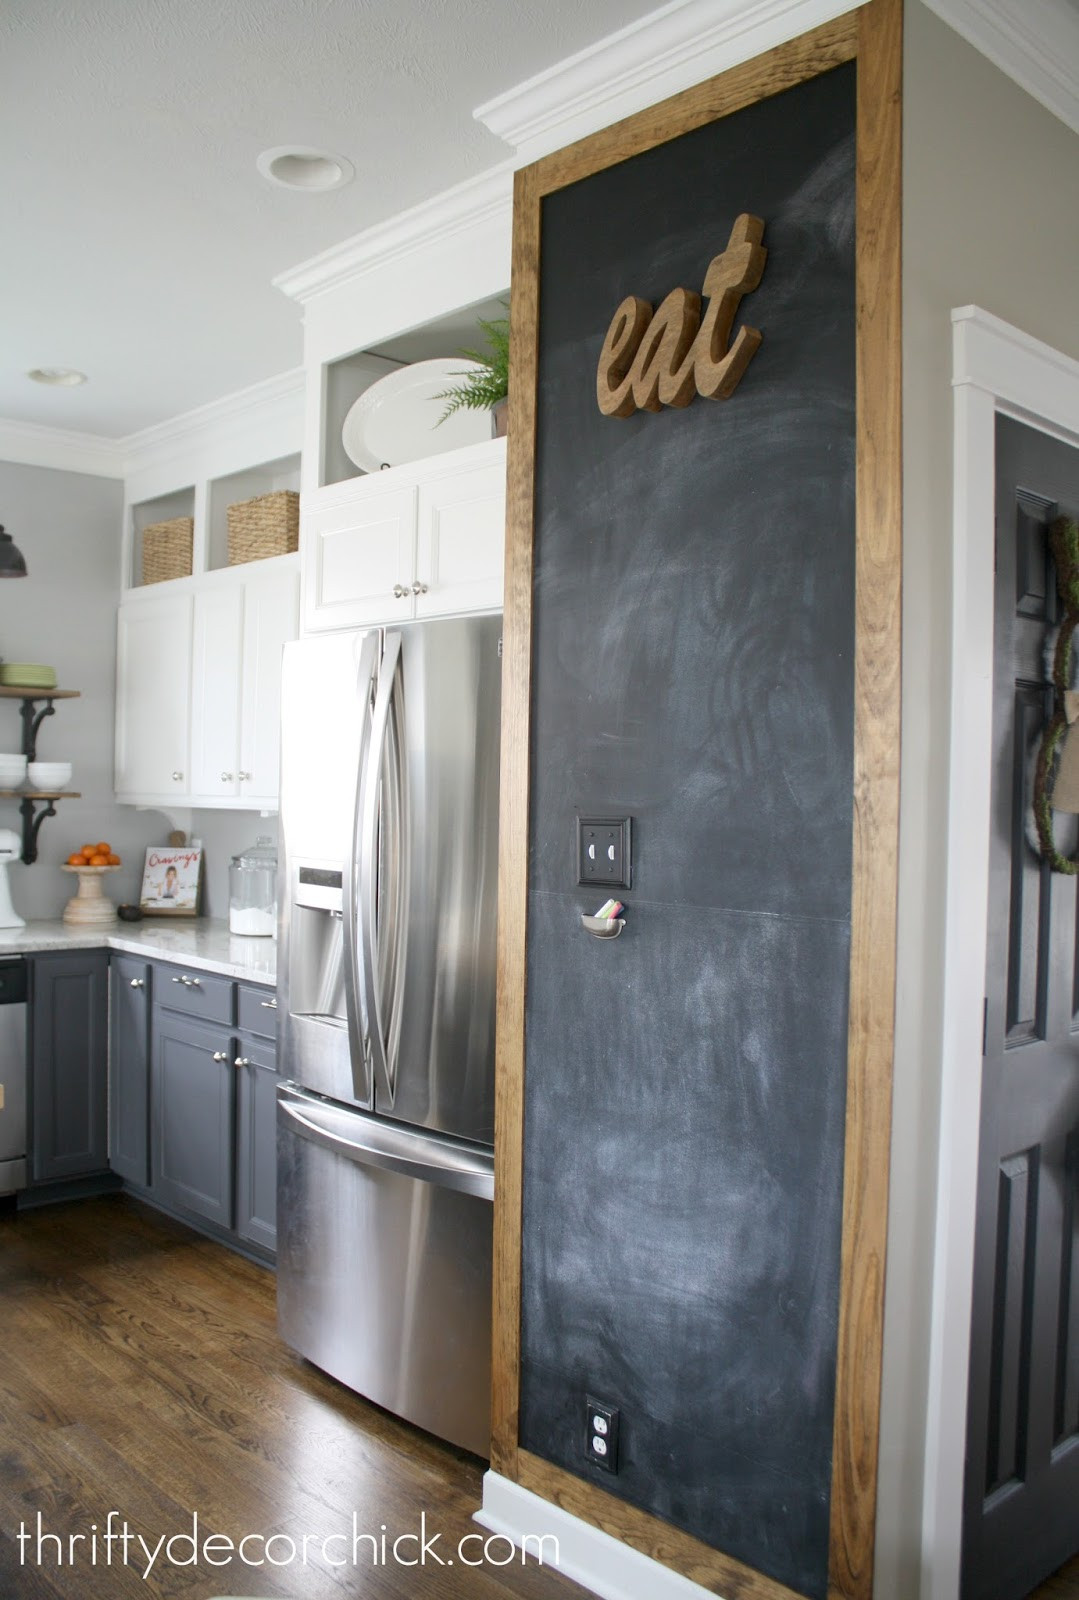 Kitchen Chalkboard Wall Ideas
 Adding some rustic charm to the kitchen from Thrifty Decor